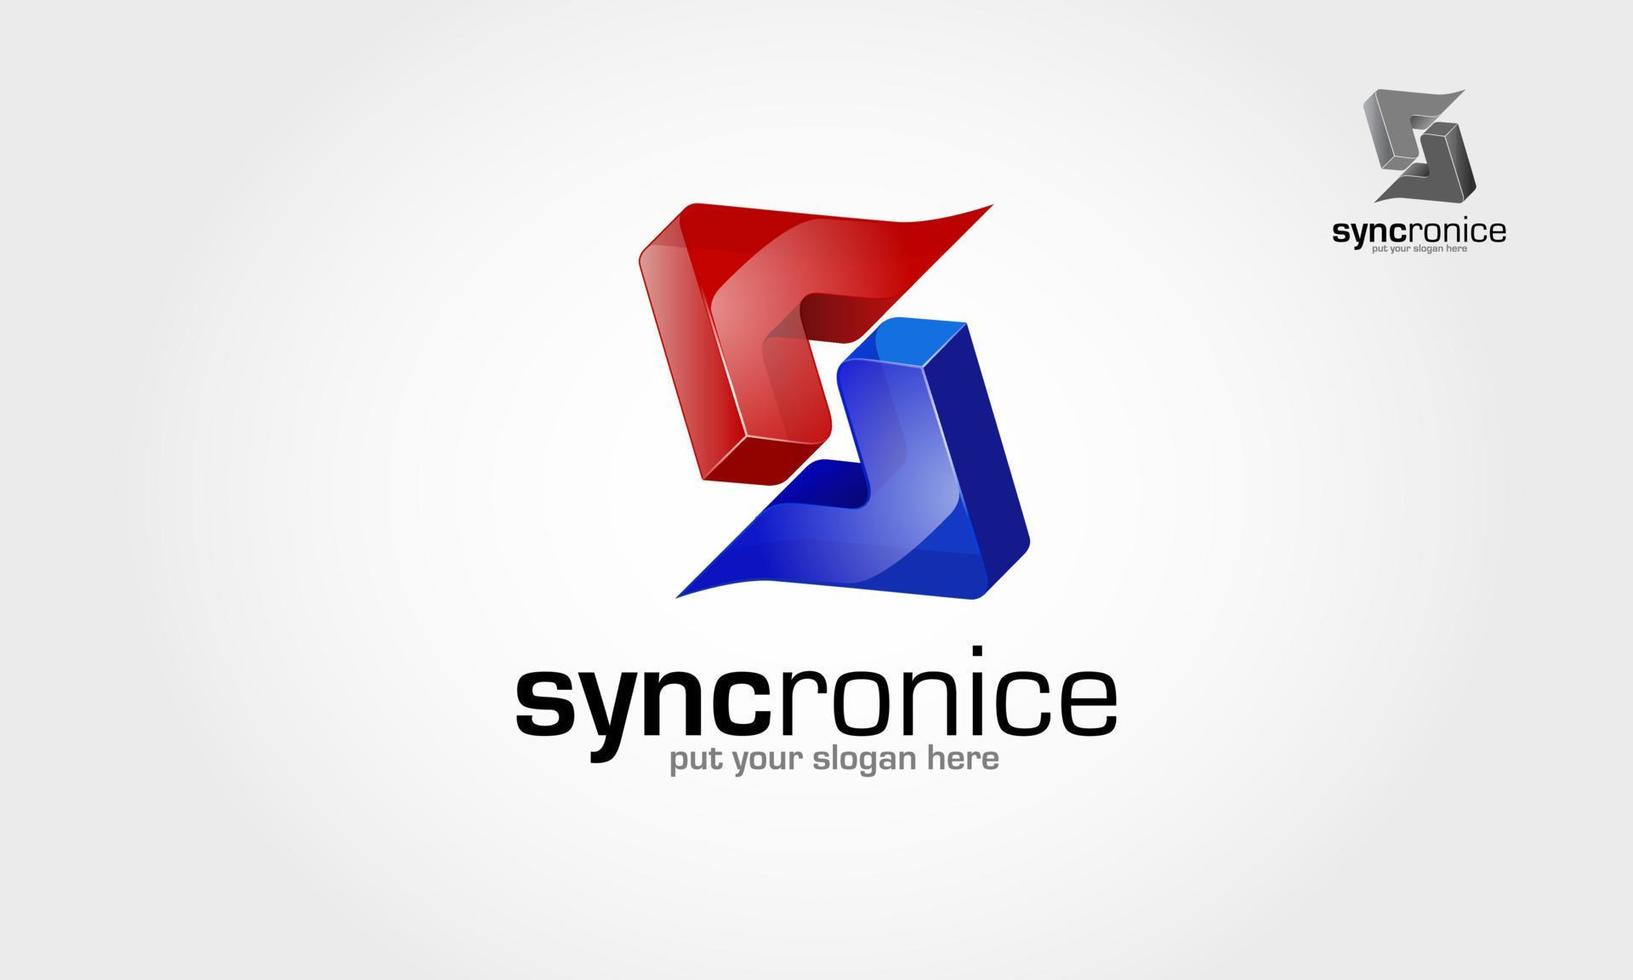 Syncronice Vector Logo Template. This is an abstract logo but also can be interpreted as a letter of S logo. Vector logo Illustration.